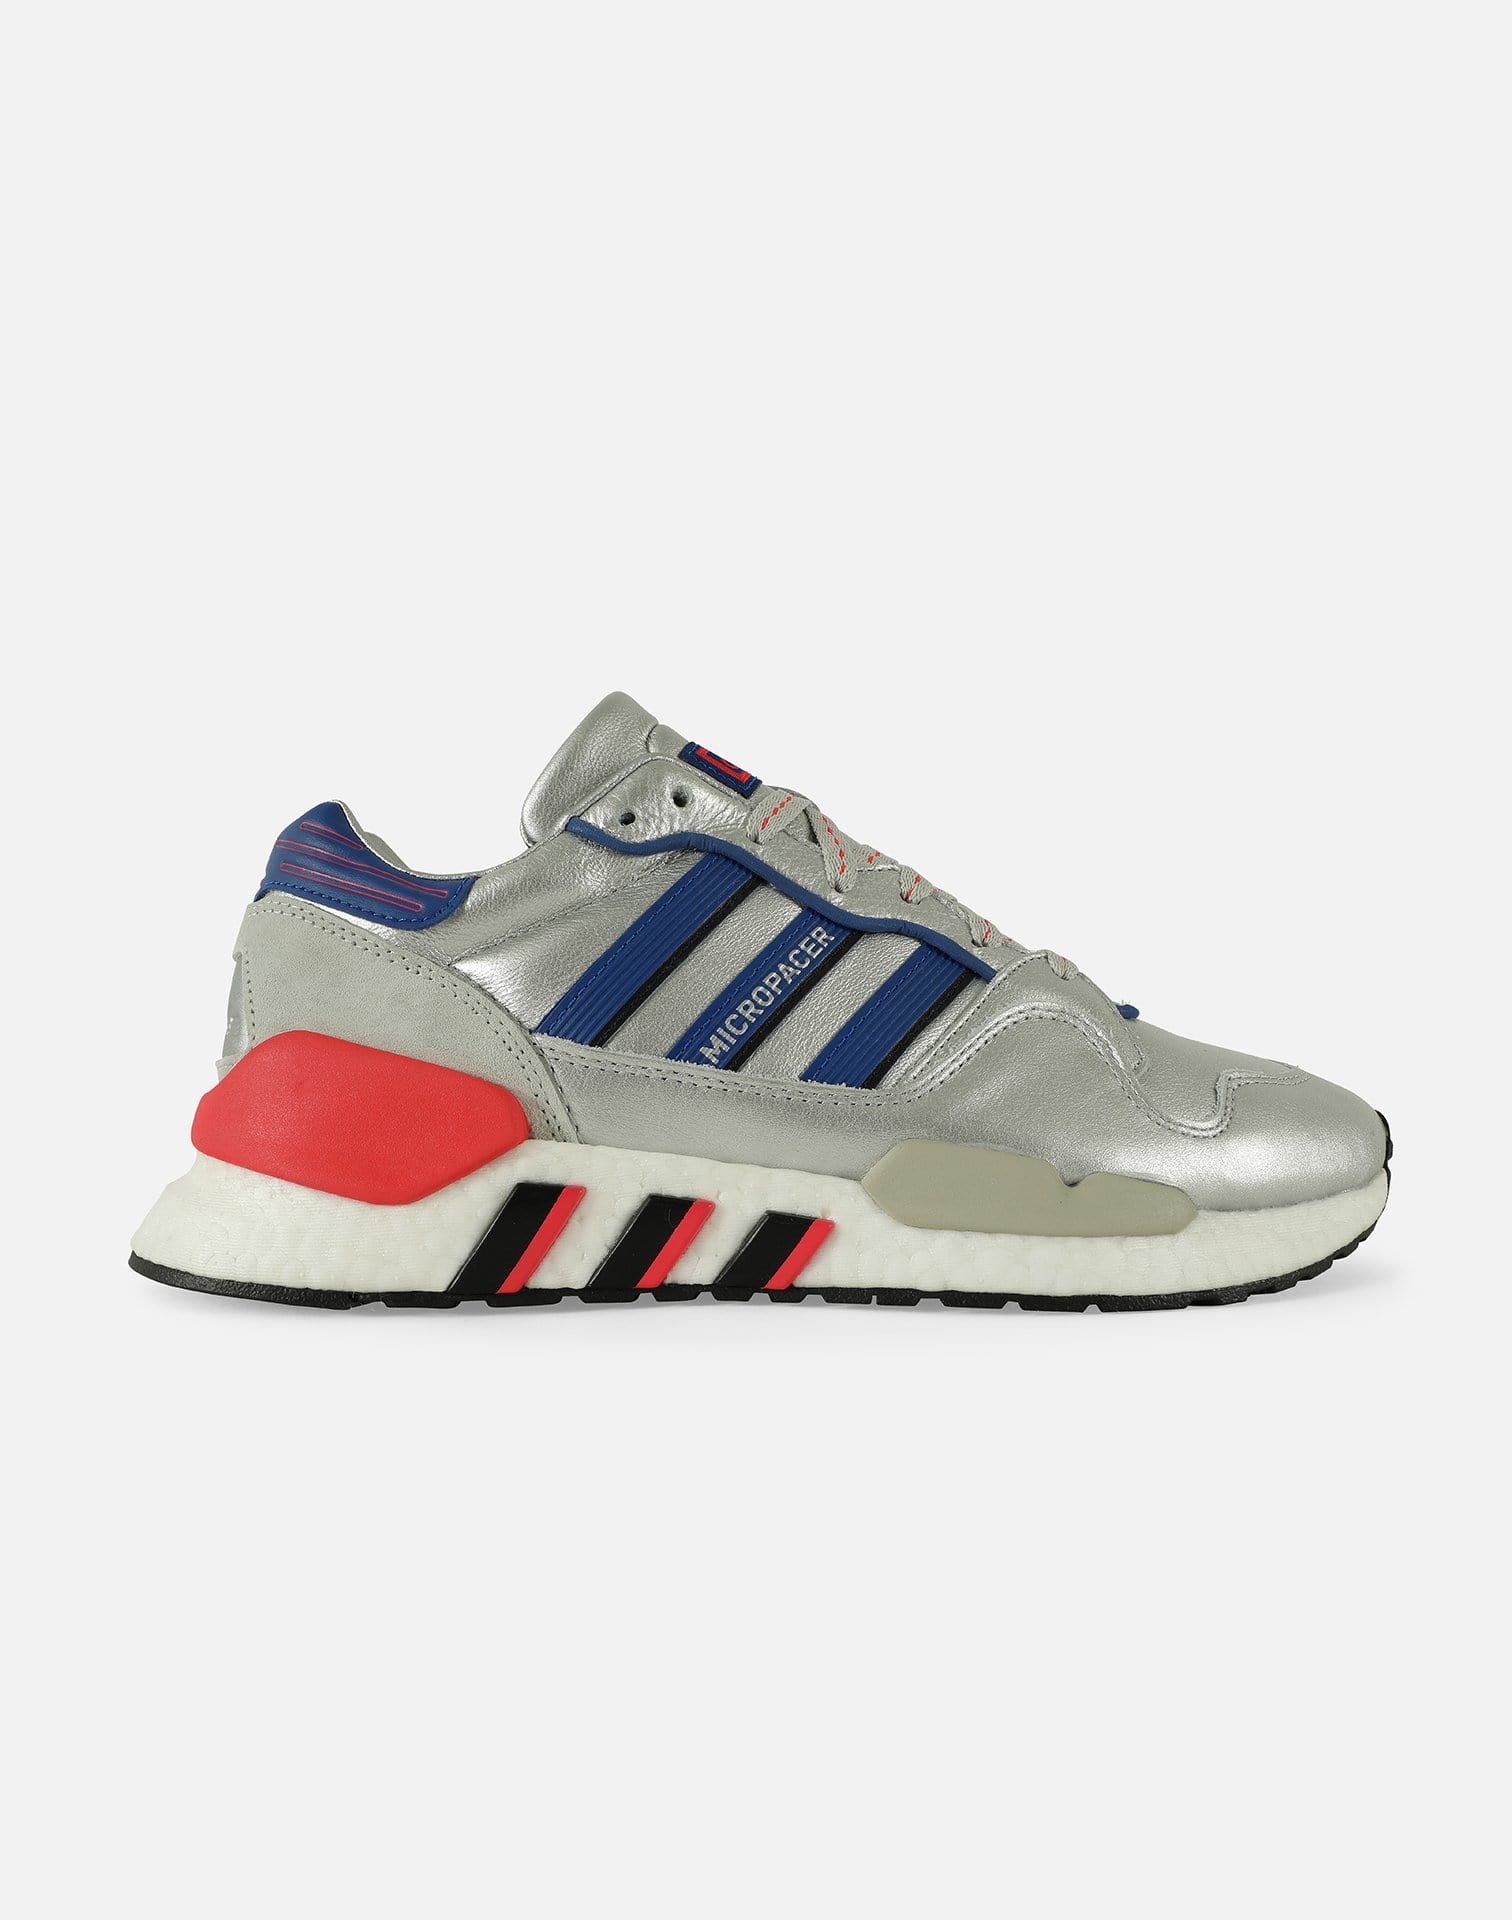 adidas zx 930 eqt micropacer